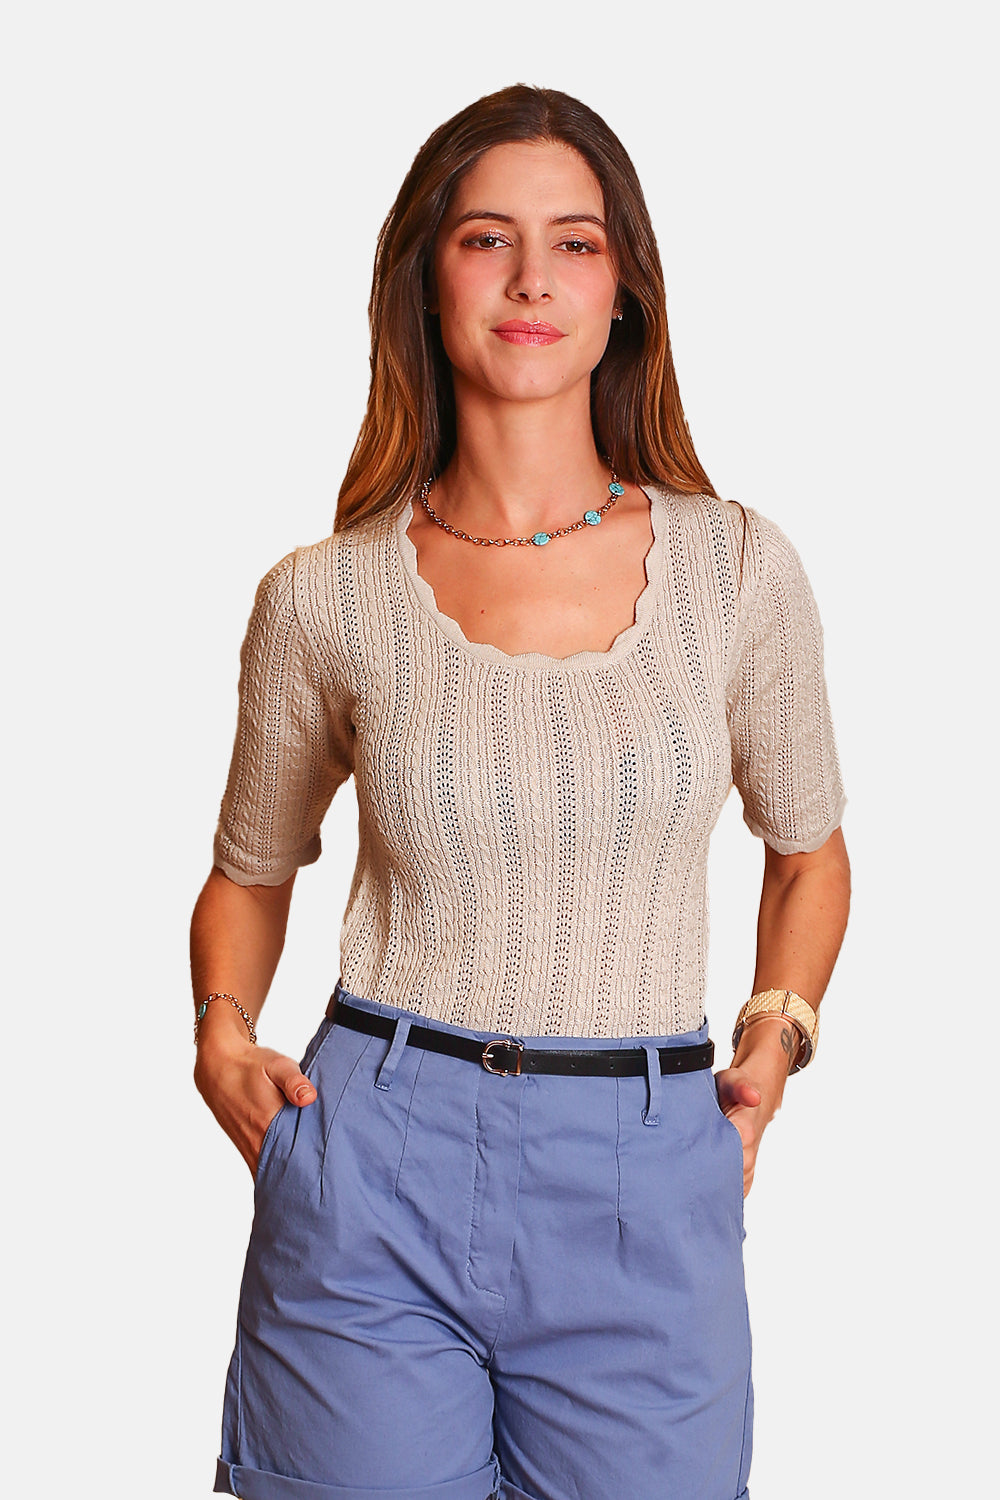 Short-sleeved square-neck sweater with scalloped finishes